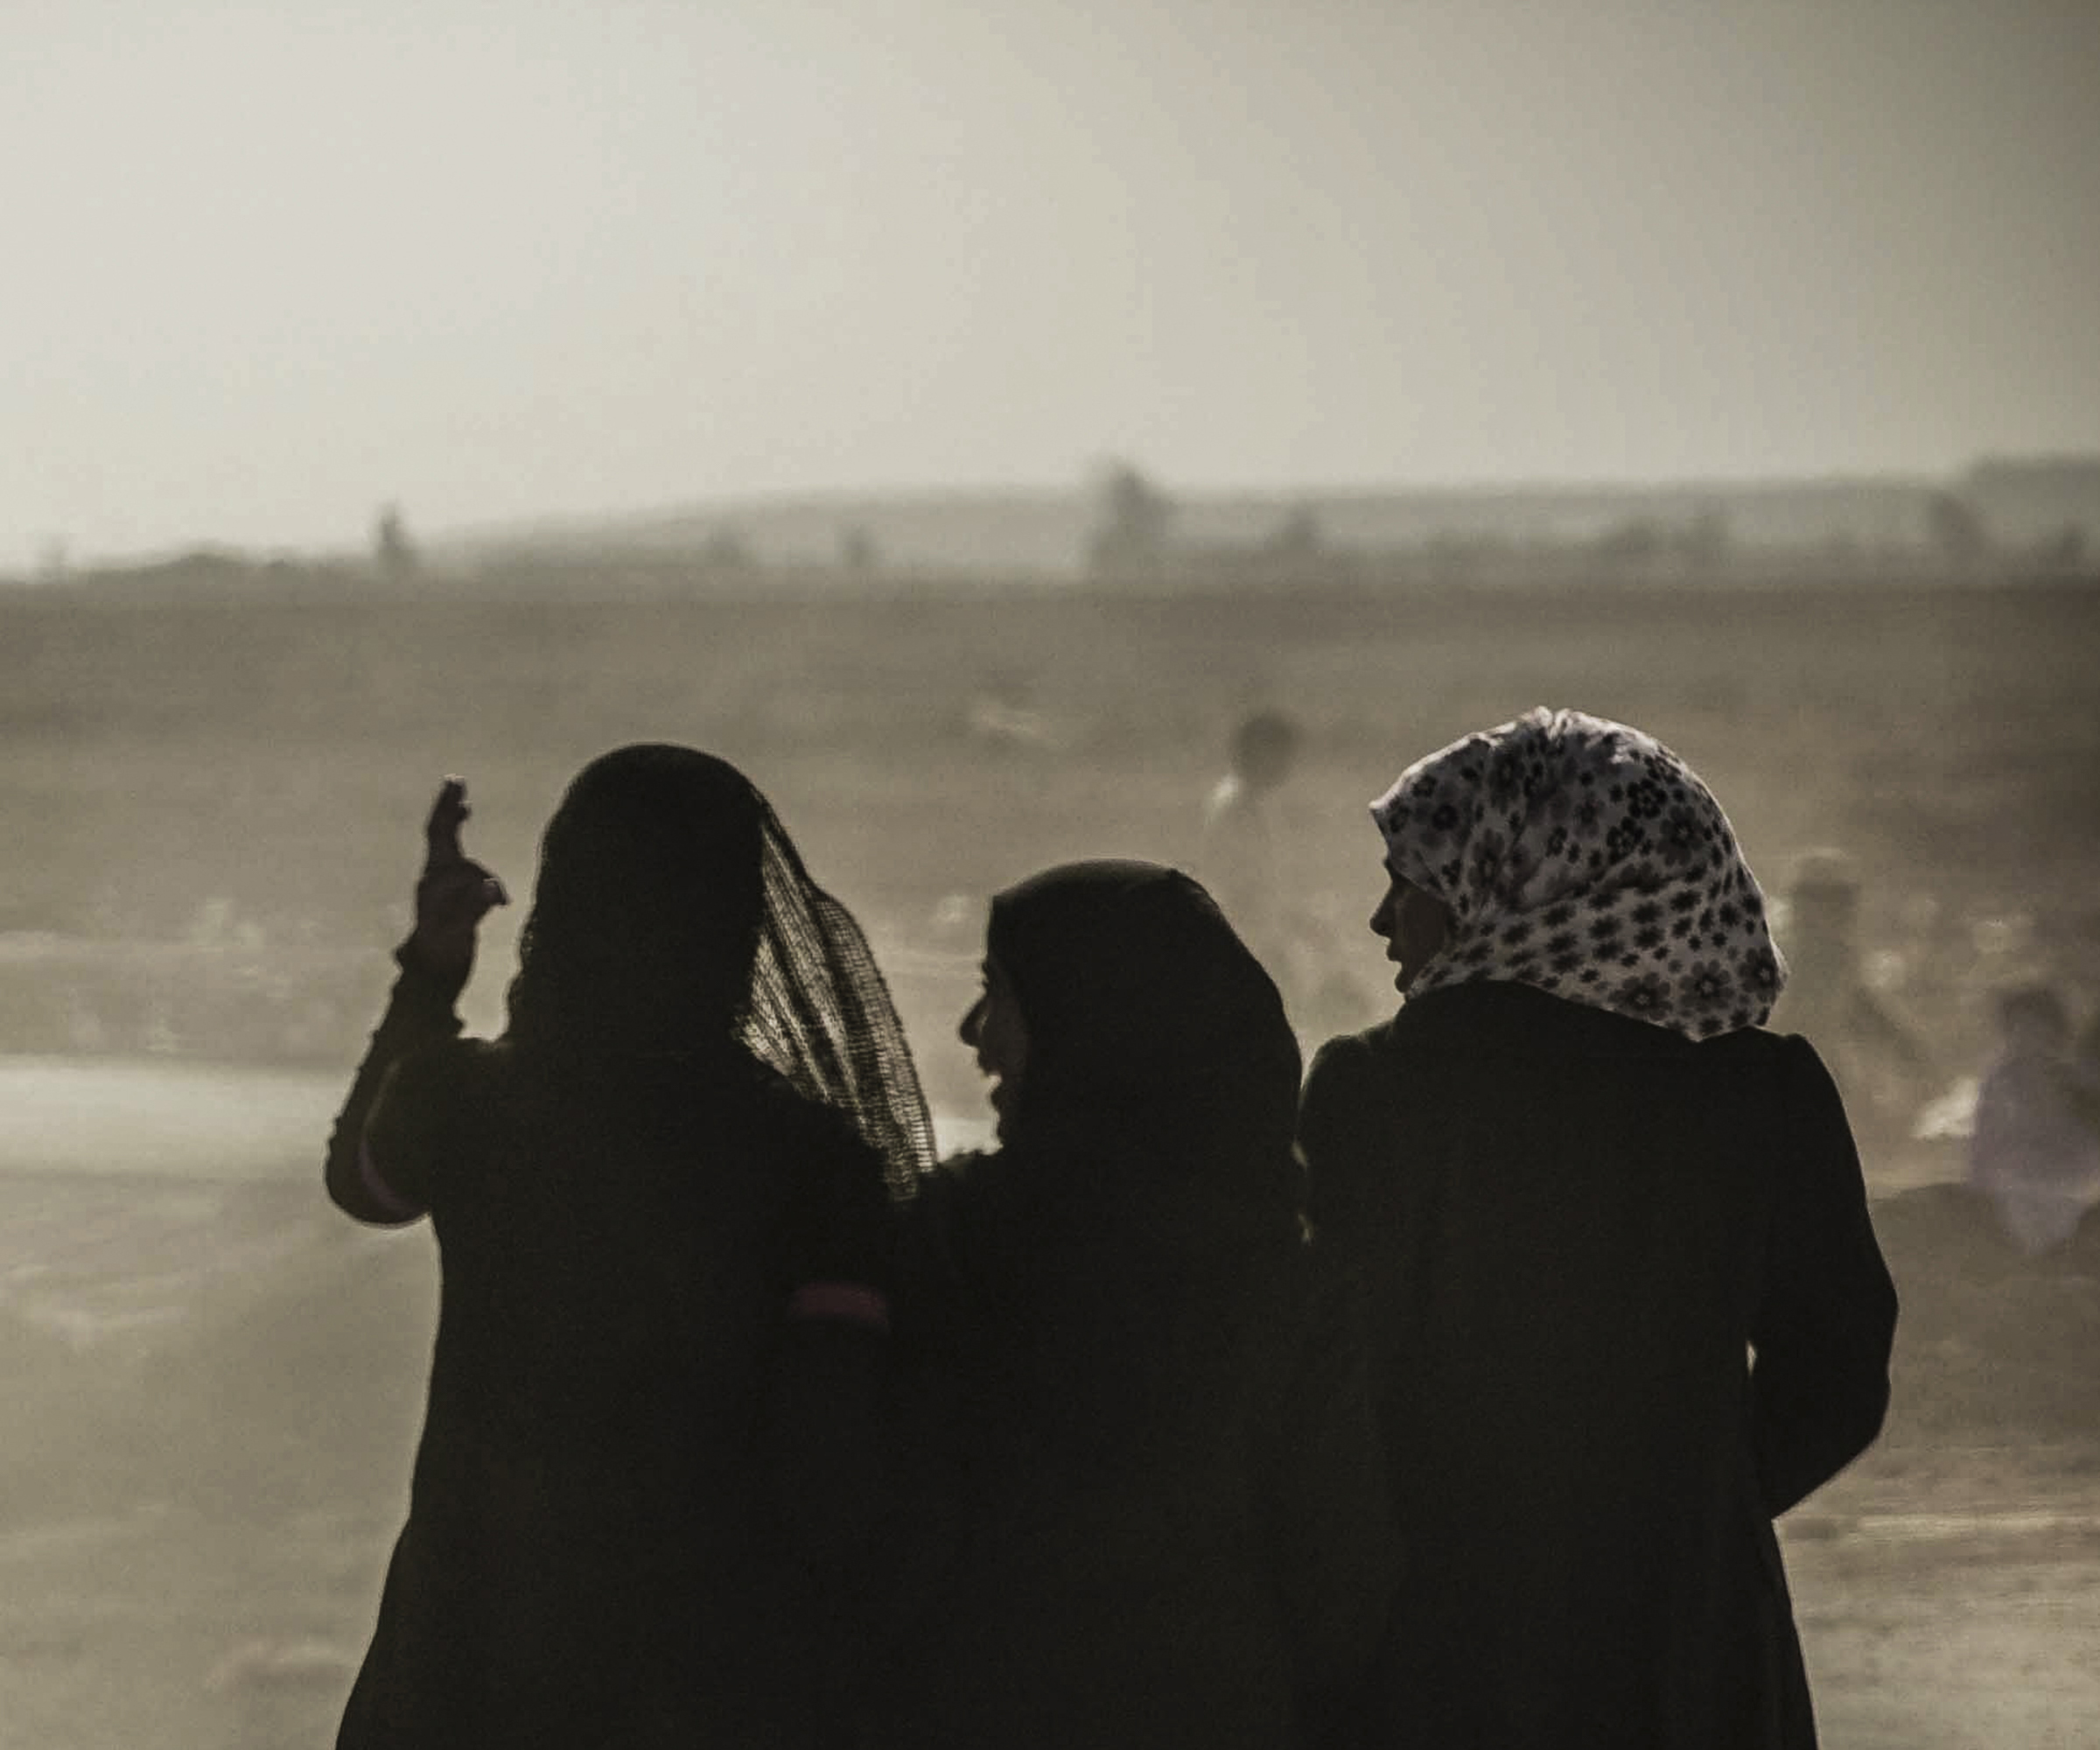 The backs of three women standing together